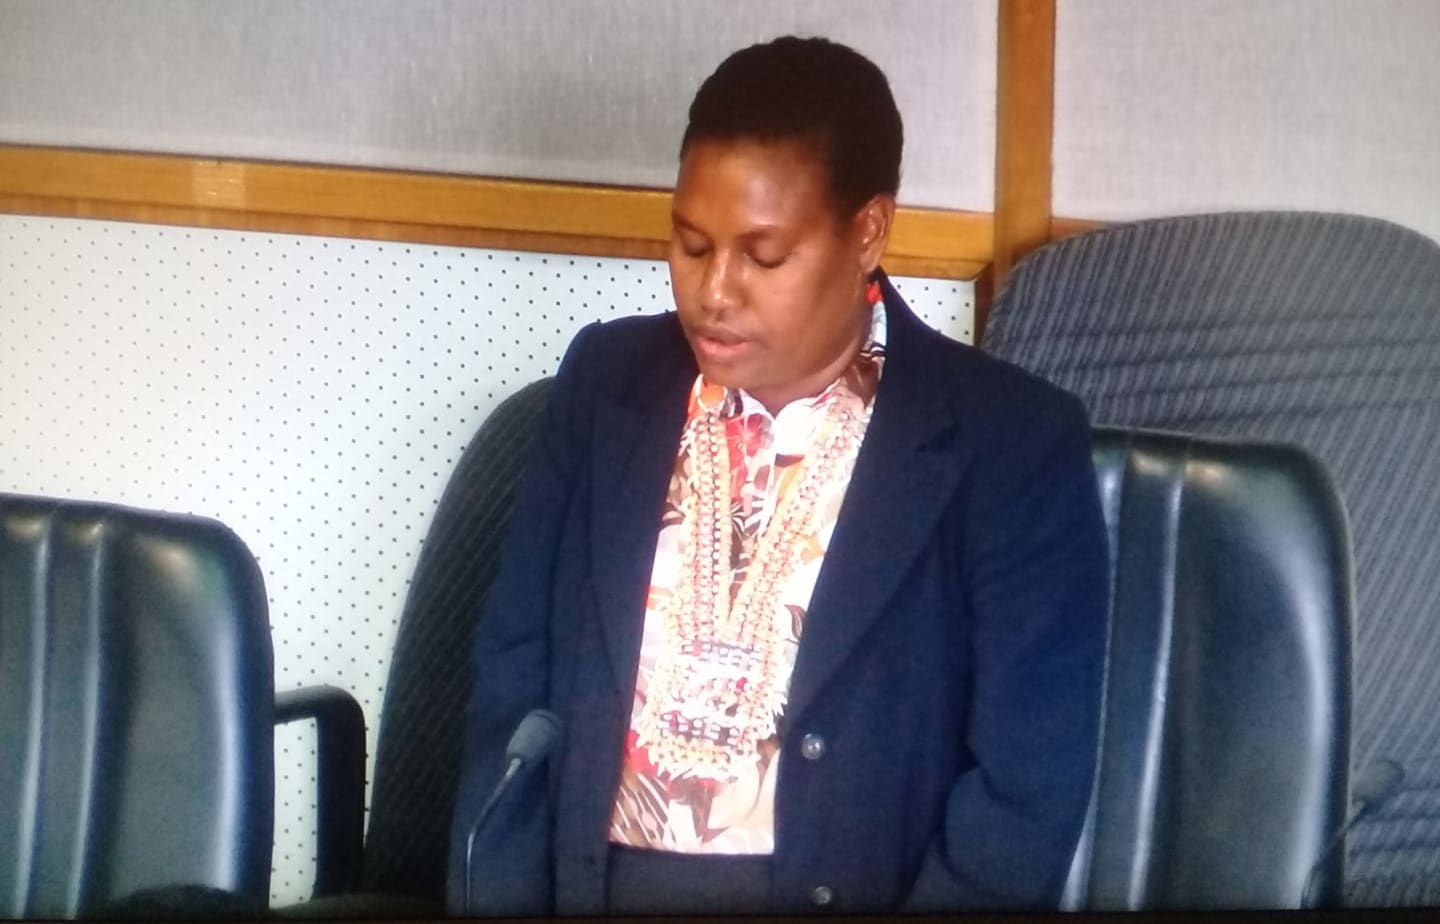 East Makira MP, Lilly Maefai, in her first parliamentary speech said that her win in the recent by-election was dedicated to her late husband and former MP for East Makira, Charles Maefai.